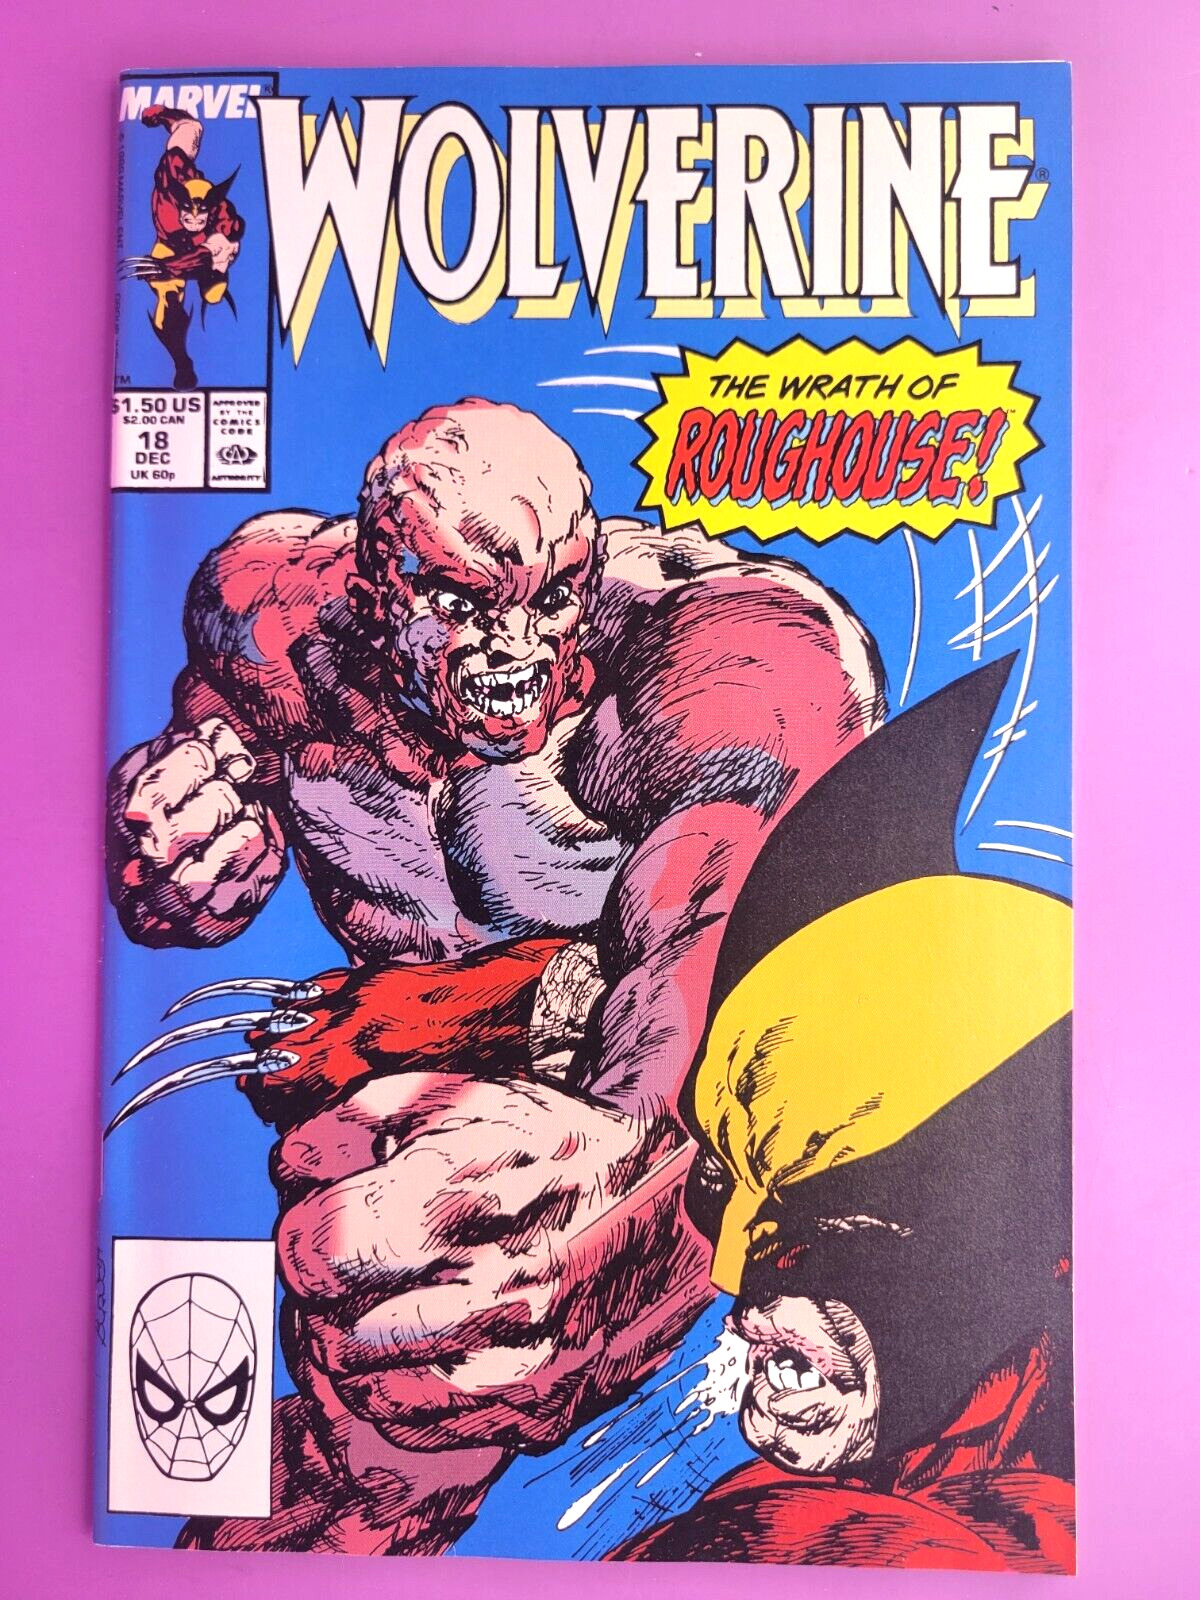 WOLVERINE  #18    VF    1989  COMBINE SHIPPING  BX2457